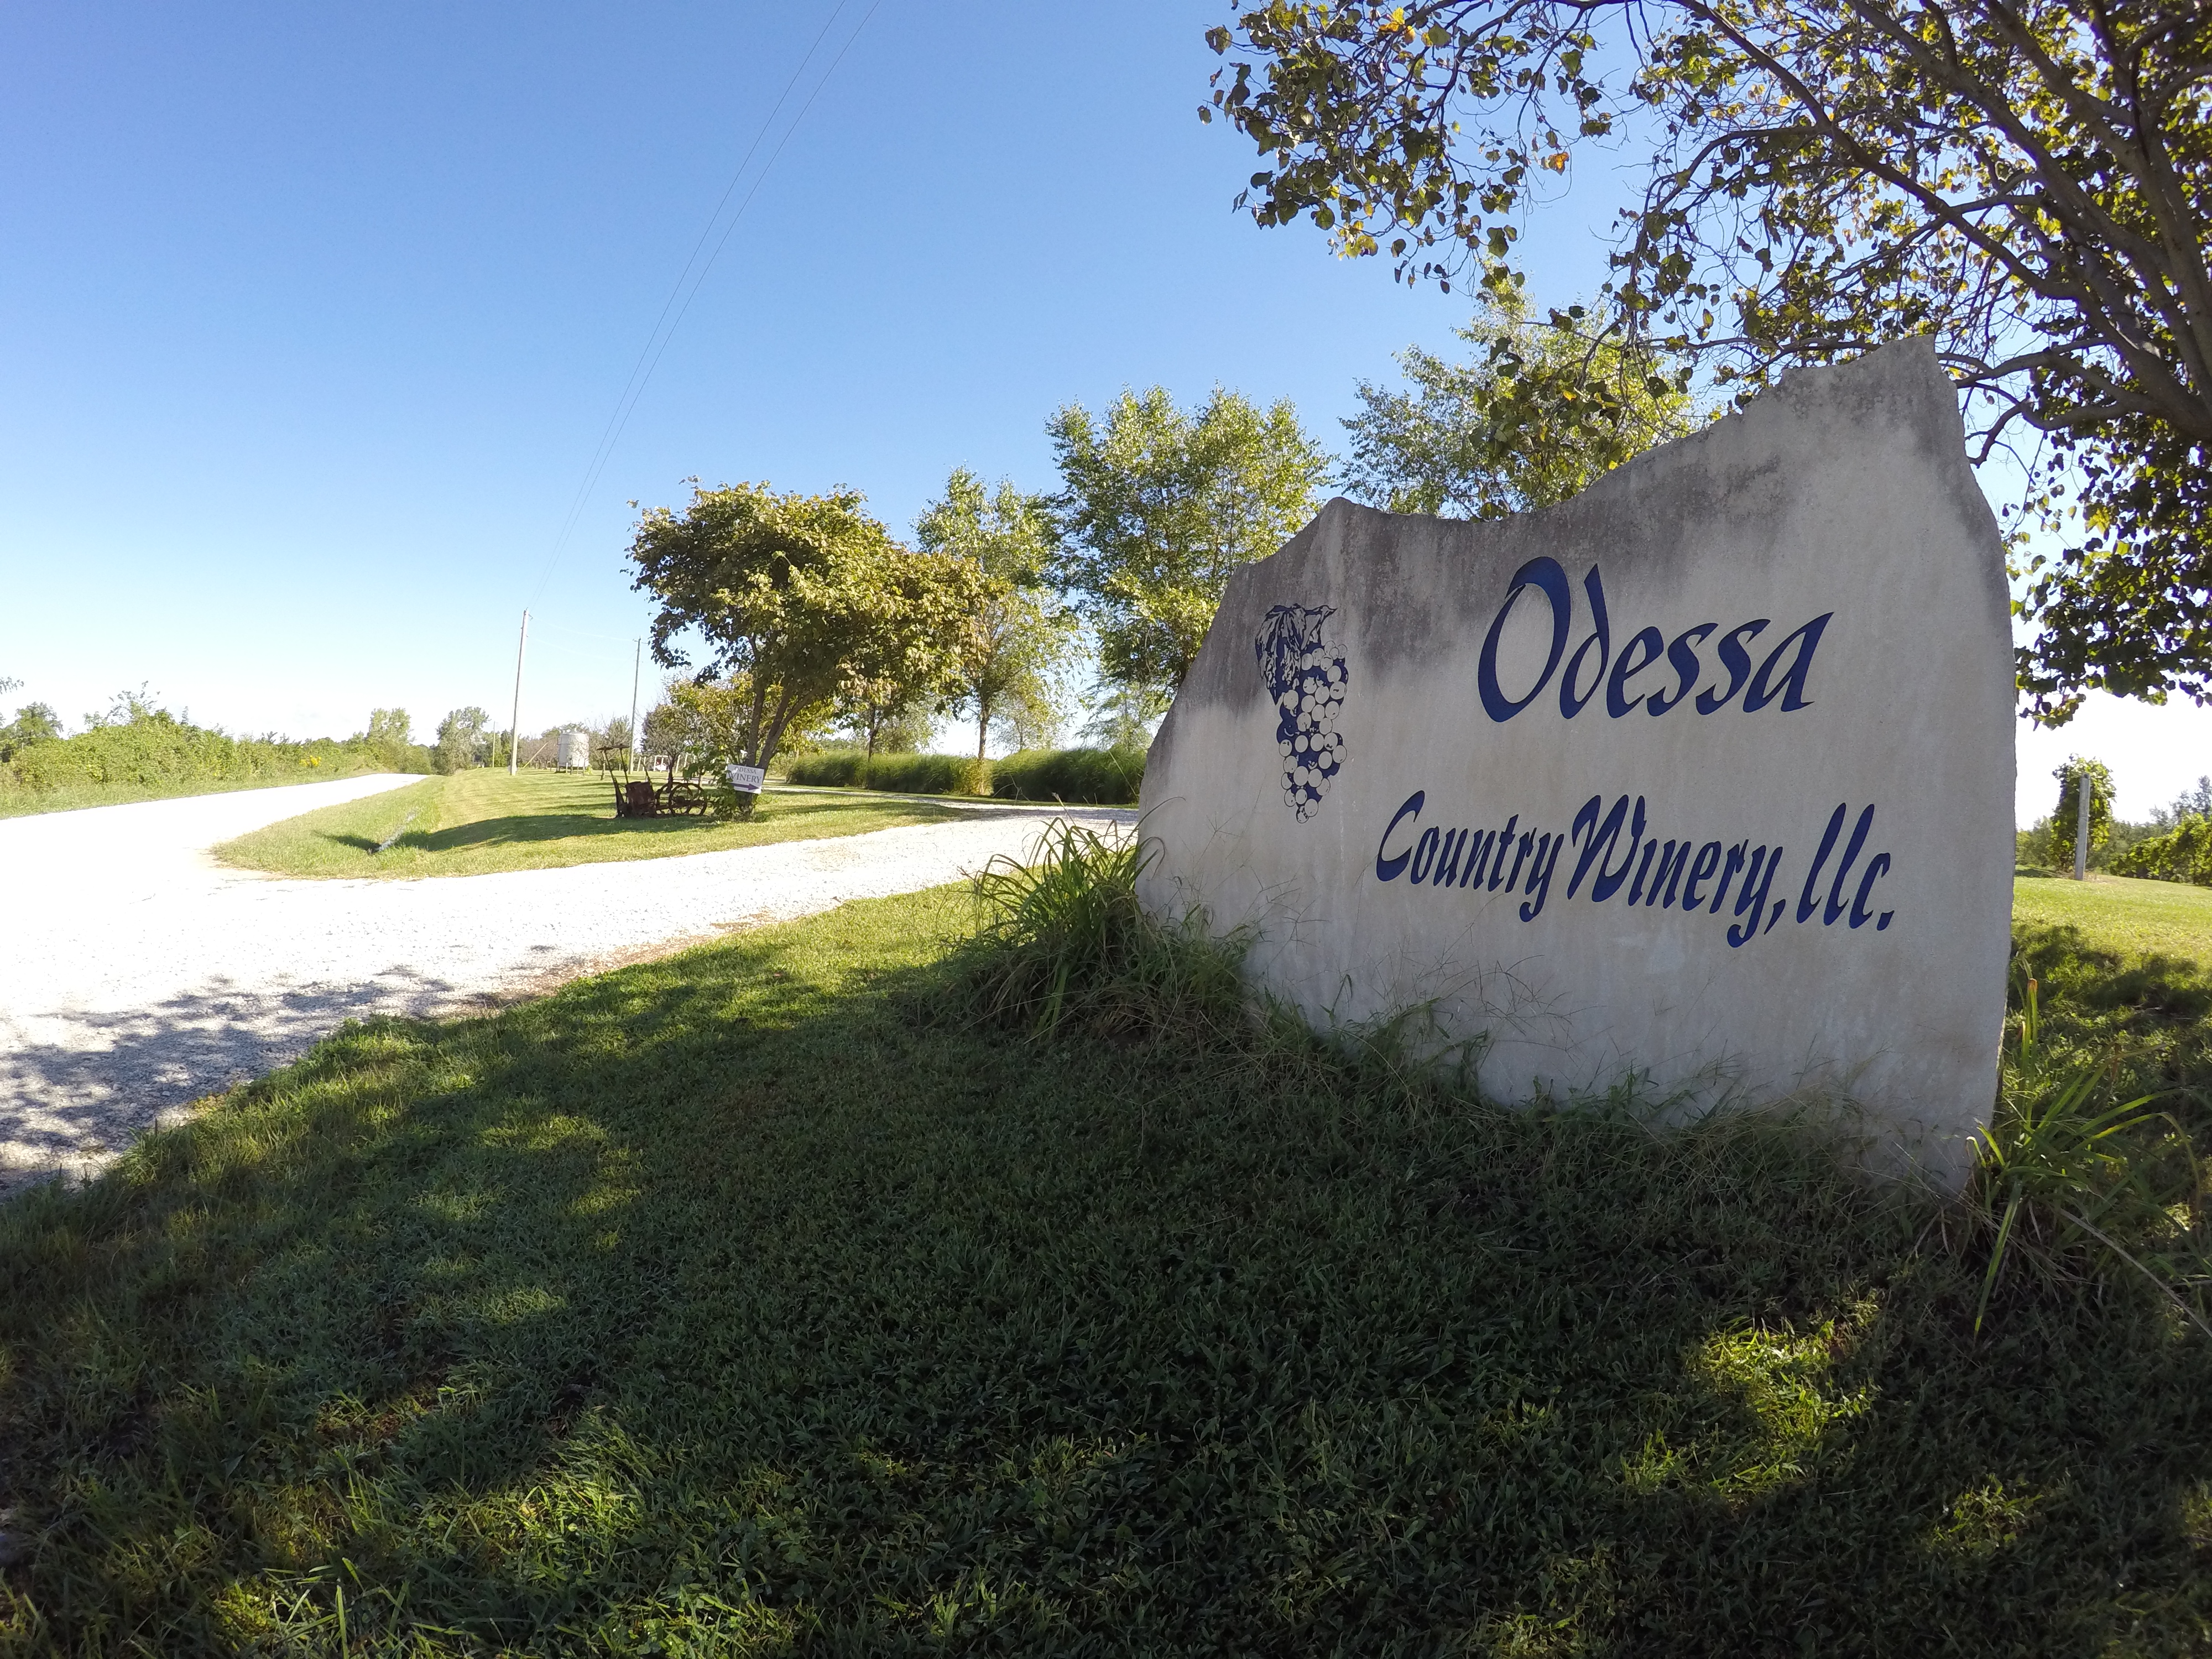 Odessa Country Winery- Winery's sign, it reads "Odessa Country Winery, llc".